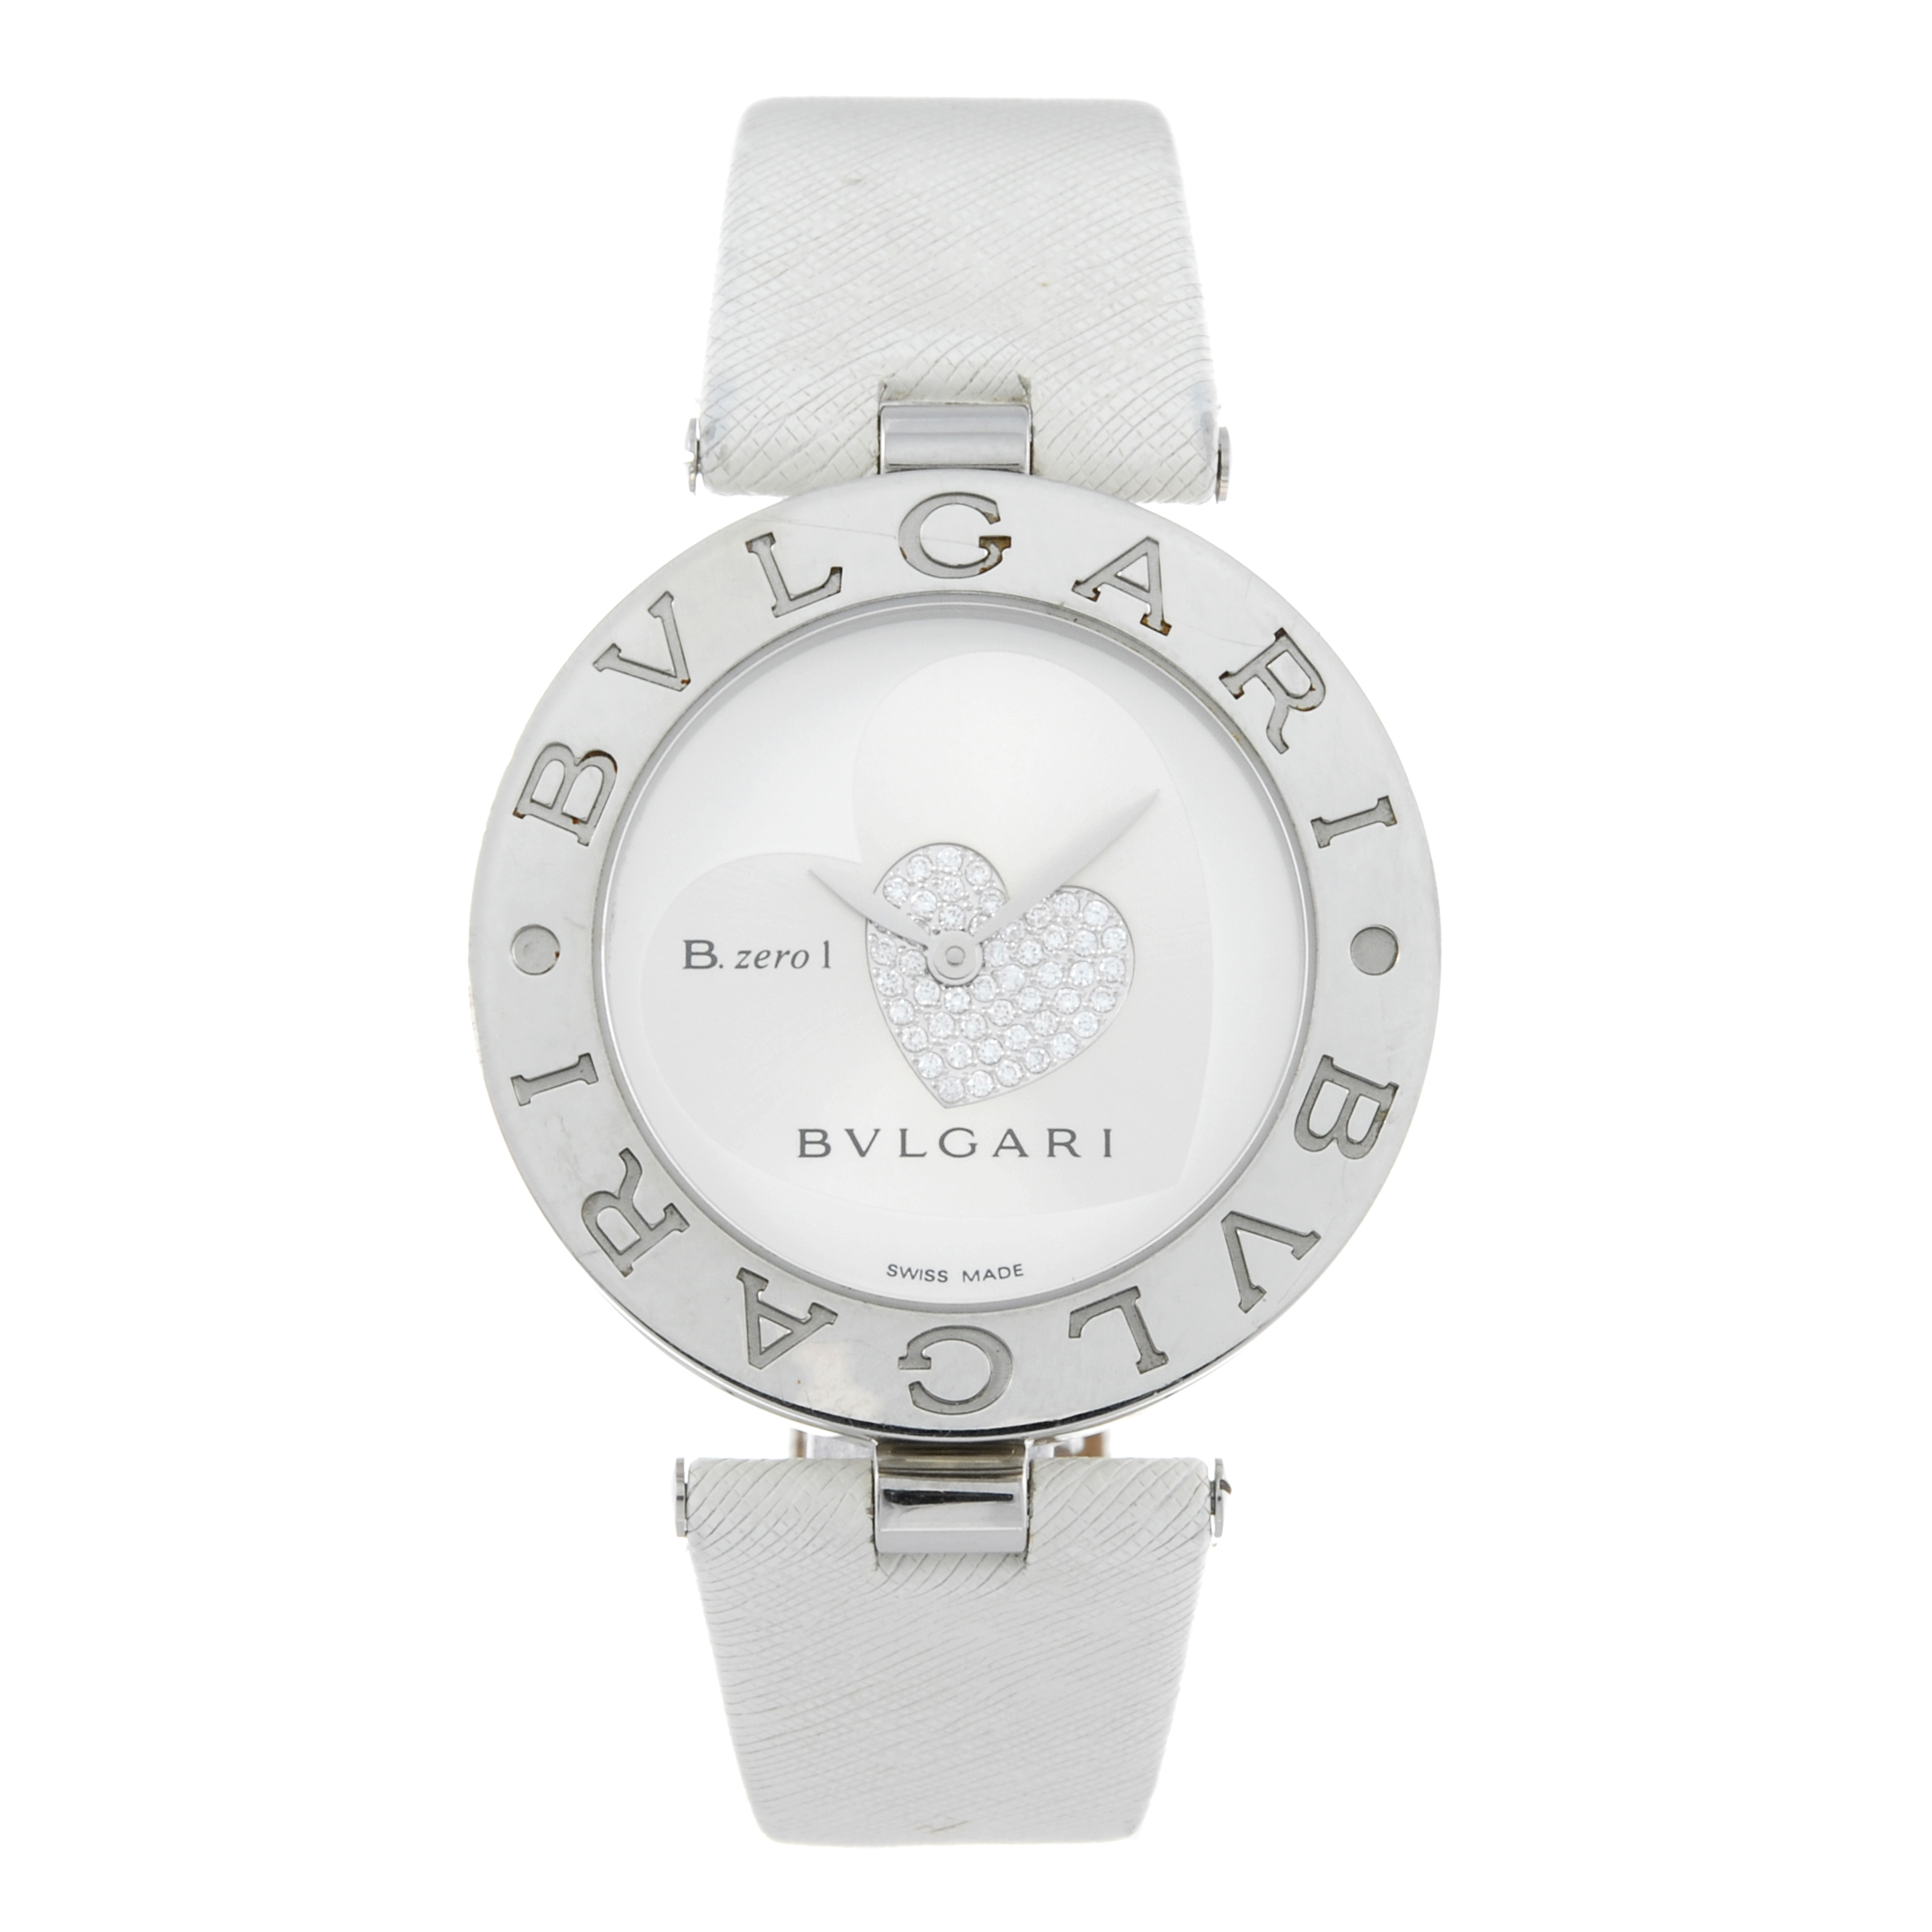 BULGARI - a lady's B.zero1 wrist watch. Stainless steel case. Reference BZ35S, serial D4900.